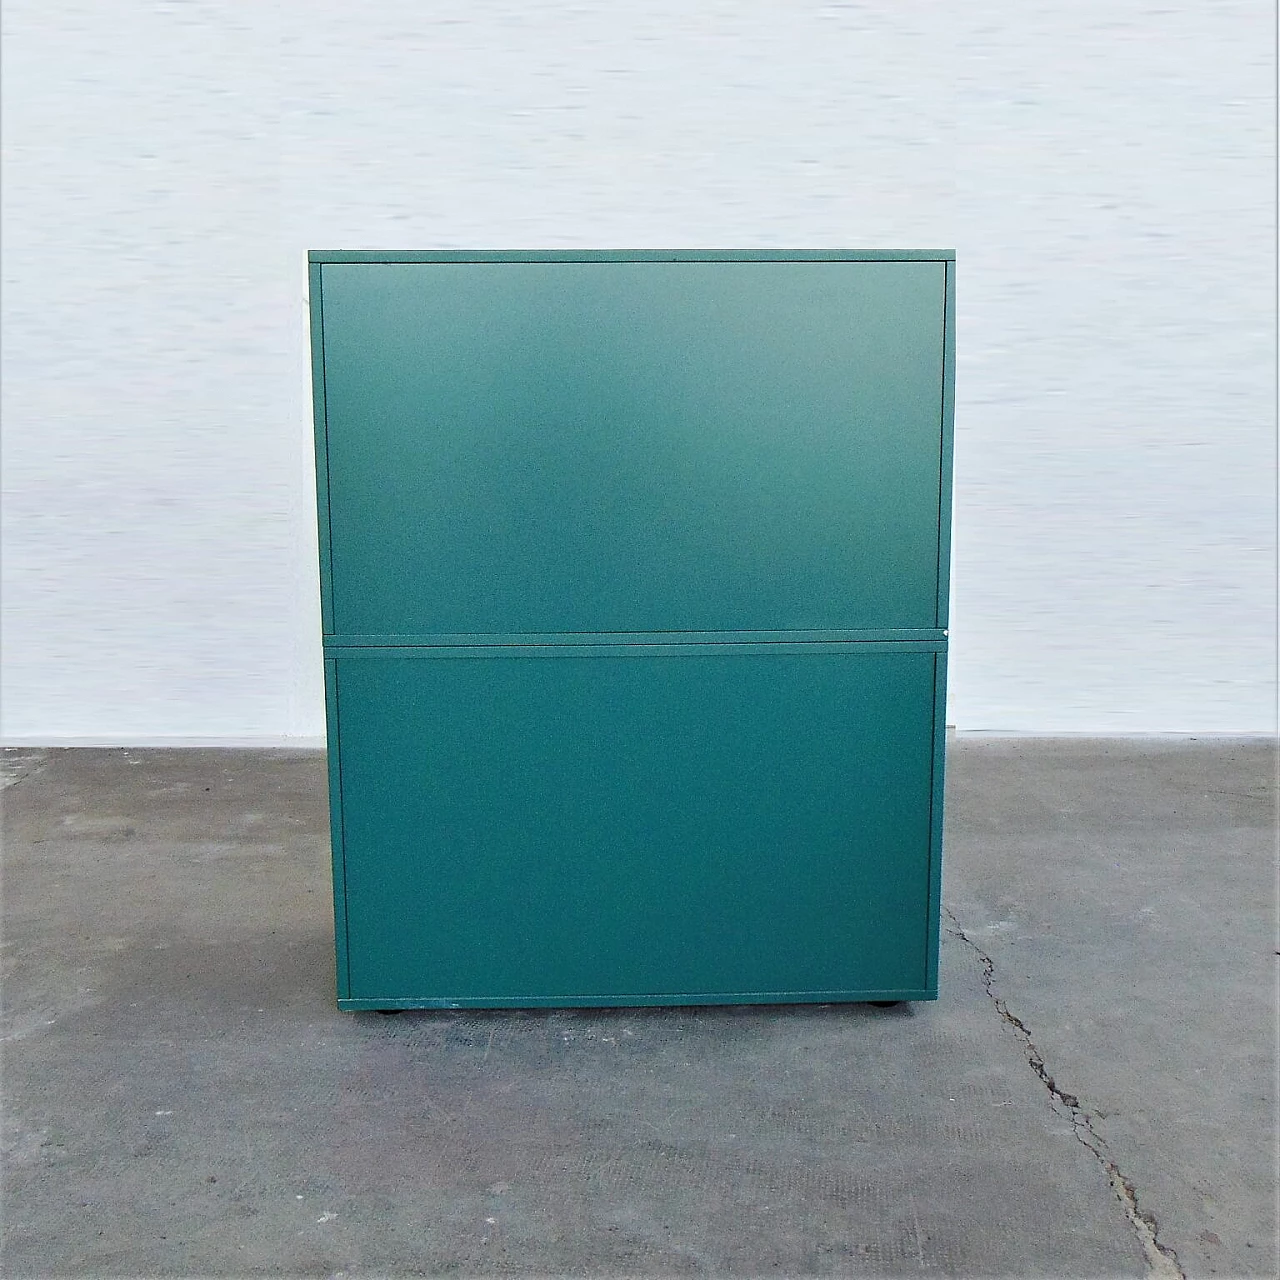 Sideboard Green Satin Lacquer, Doors in Walnut-Stained Cherry, for Roche Bobois, 1990s 1167298